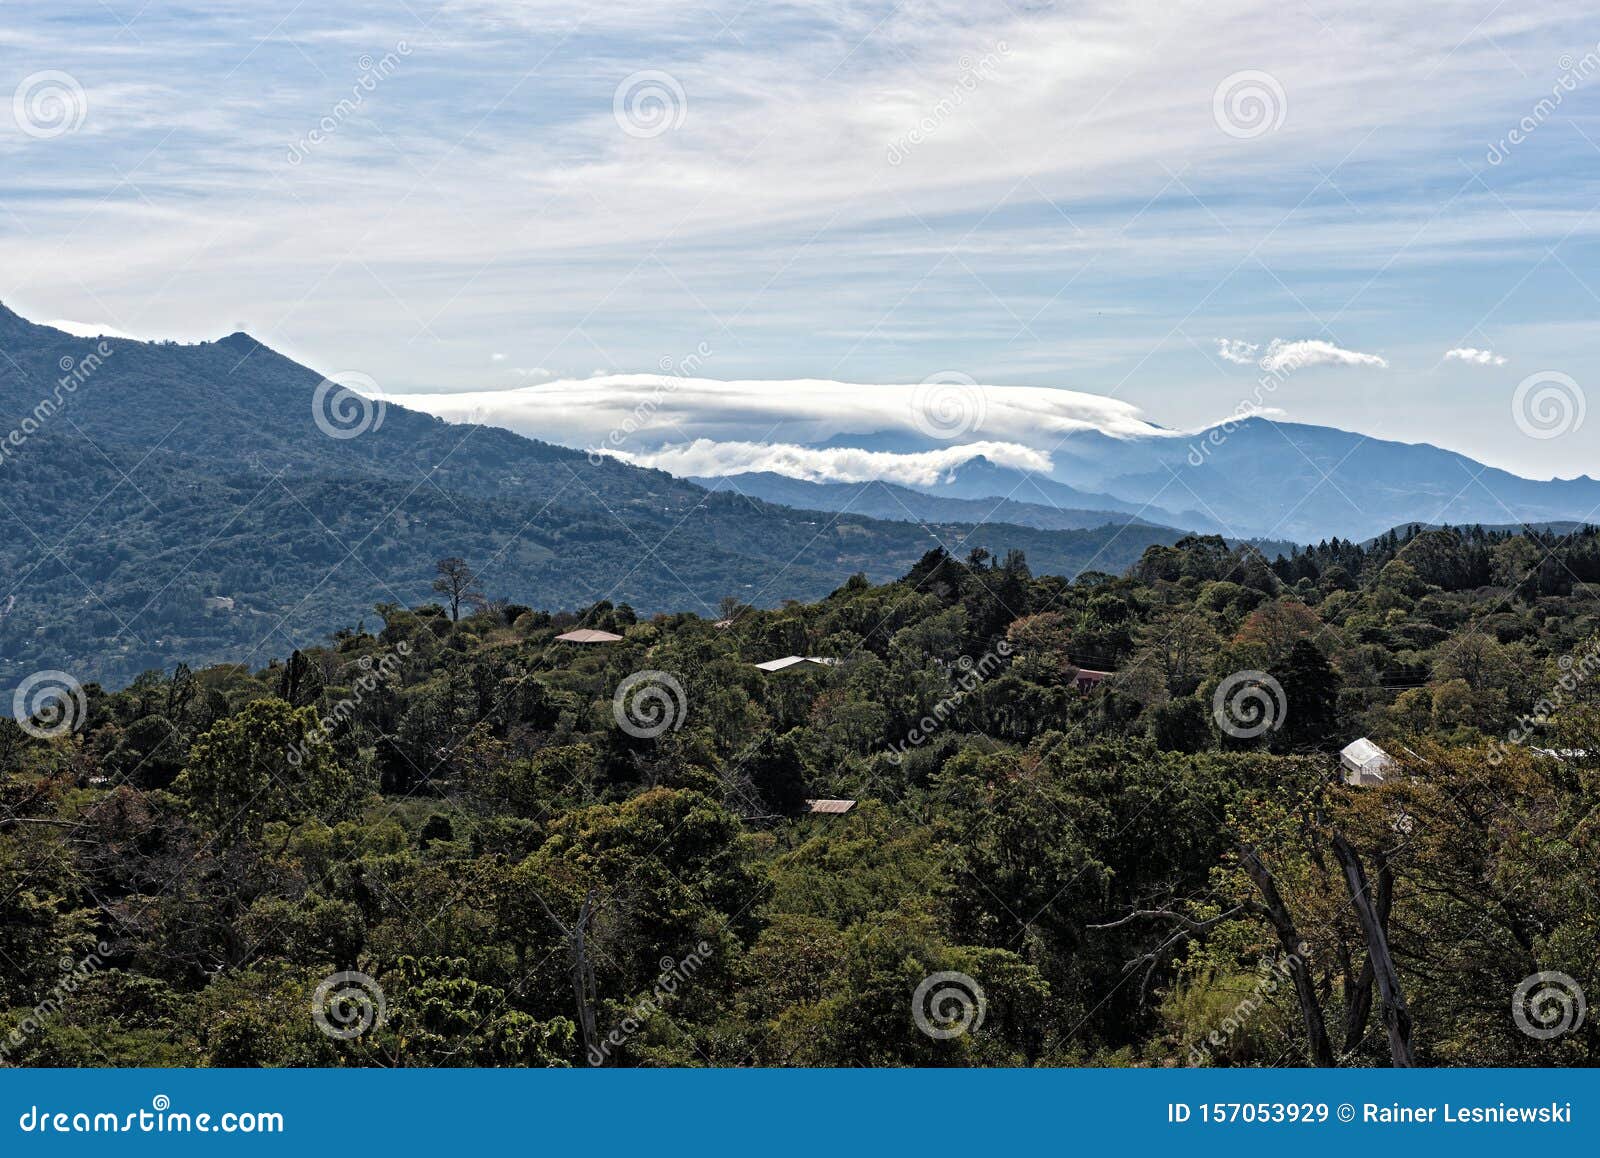 cloud forest in the north of the small town of boquete in the province of chiriqui panama